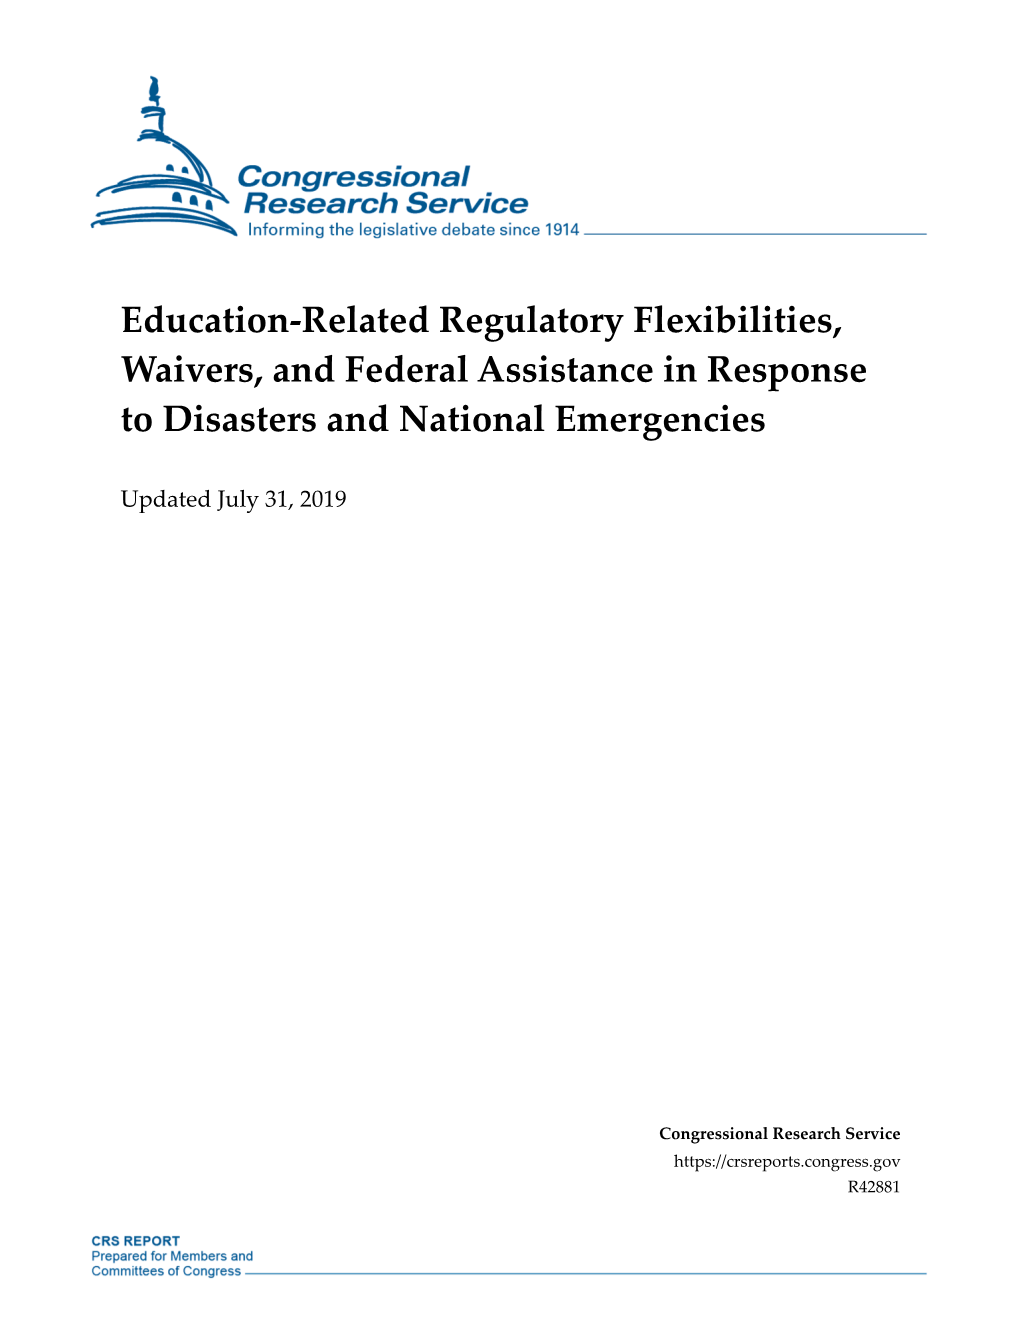 Education-Related Regulatory Flexibilities, Waivers, and Federal Assistance in Response to Disasters and National Emergencies